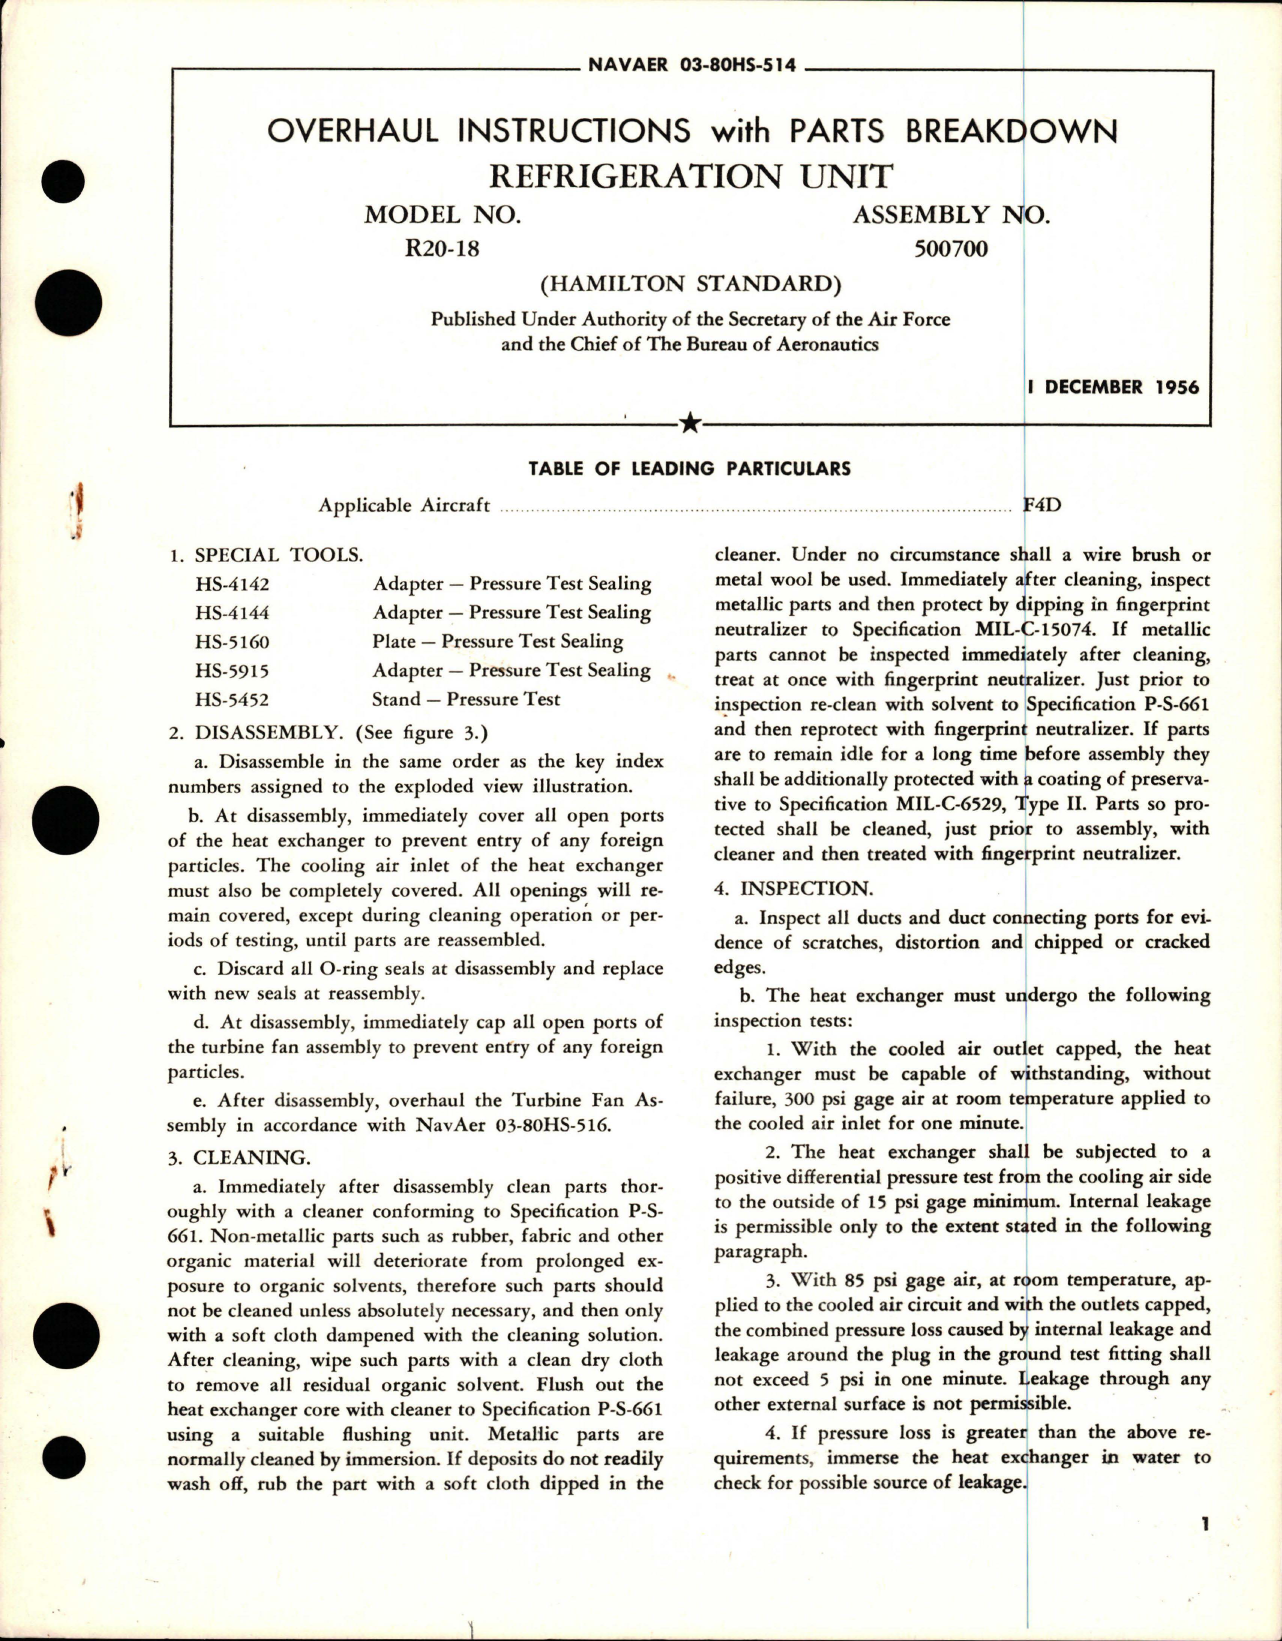 Sample page 1 from AirCorps Library document: Overhaul Instructions with Parts Breakdown - Model R20-18 - Assembly No. 500700 